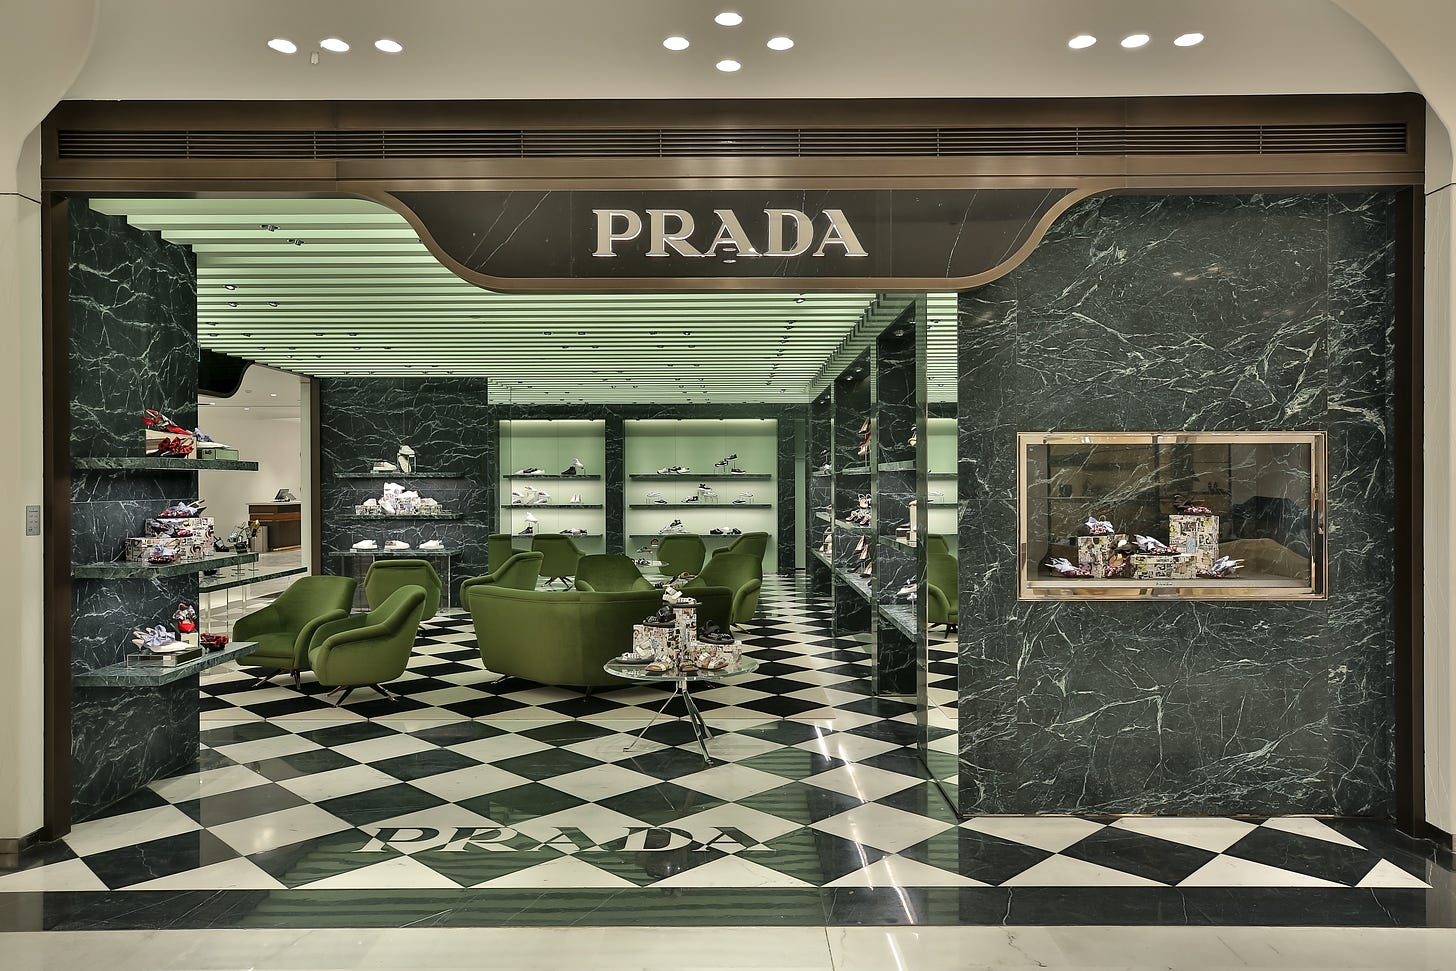 With 100 China Stores, Prada Focuses on Reaching China Directly Online